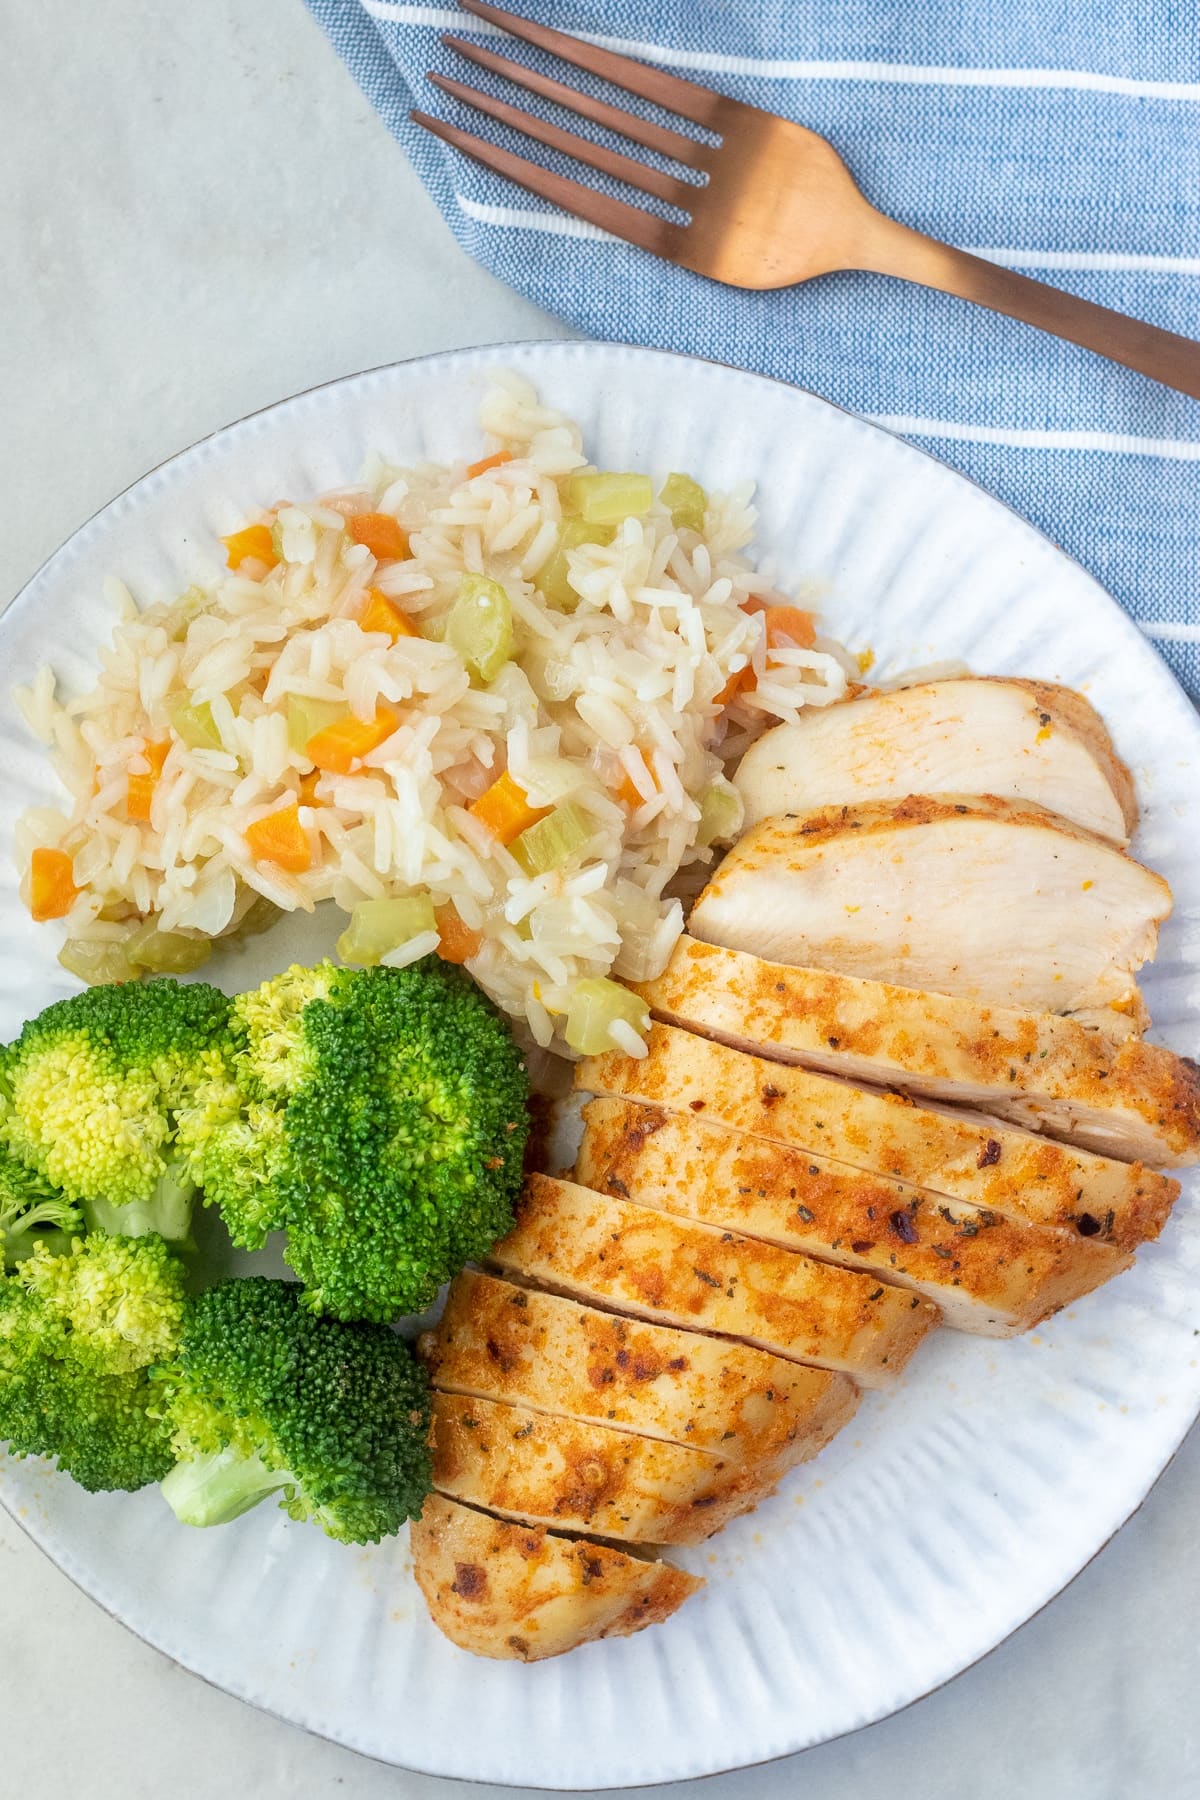 Example of how to serve healthy baked chicken breast. 